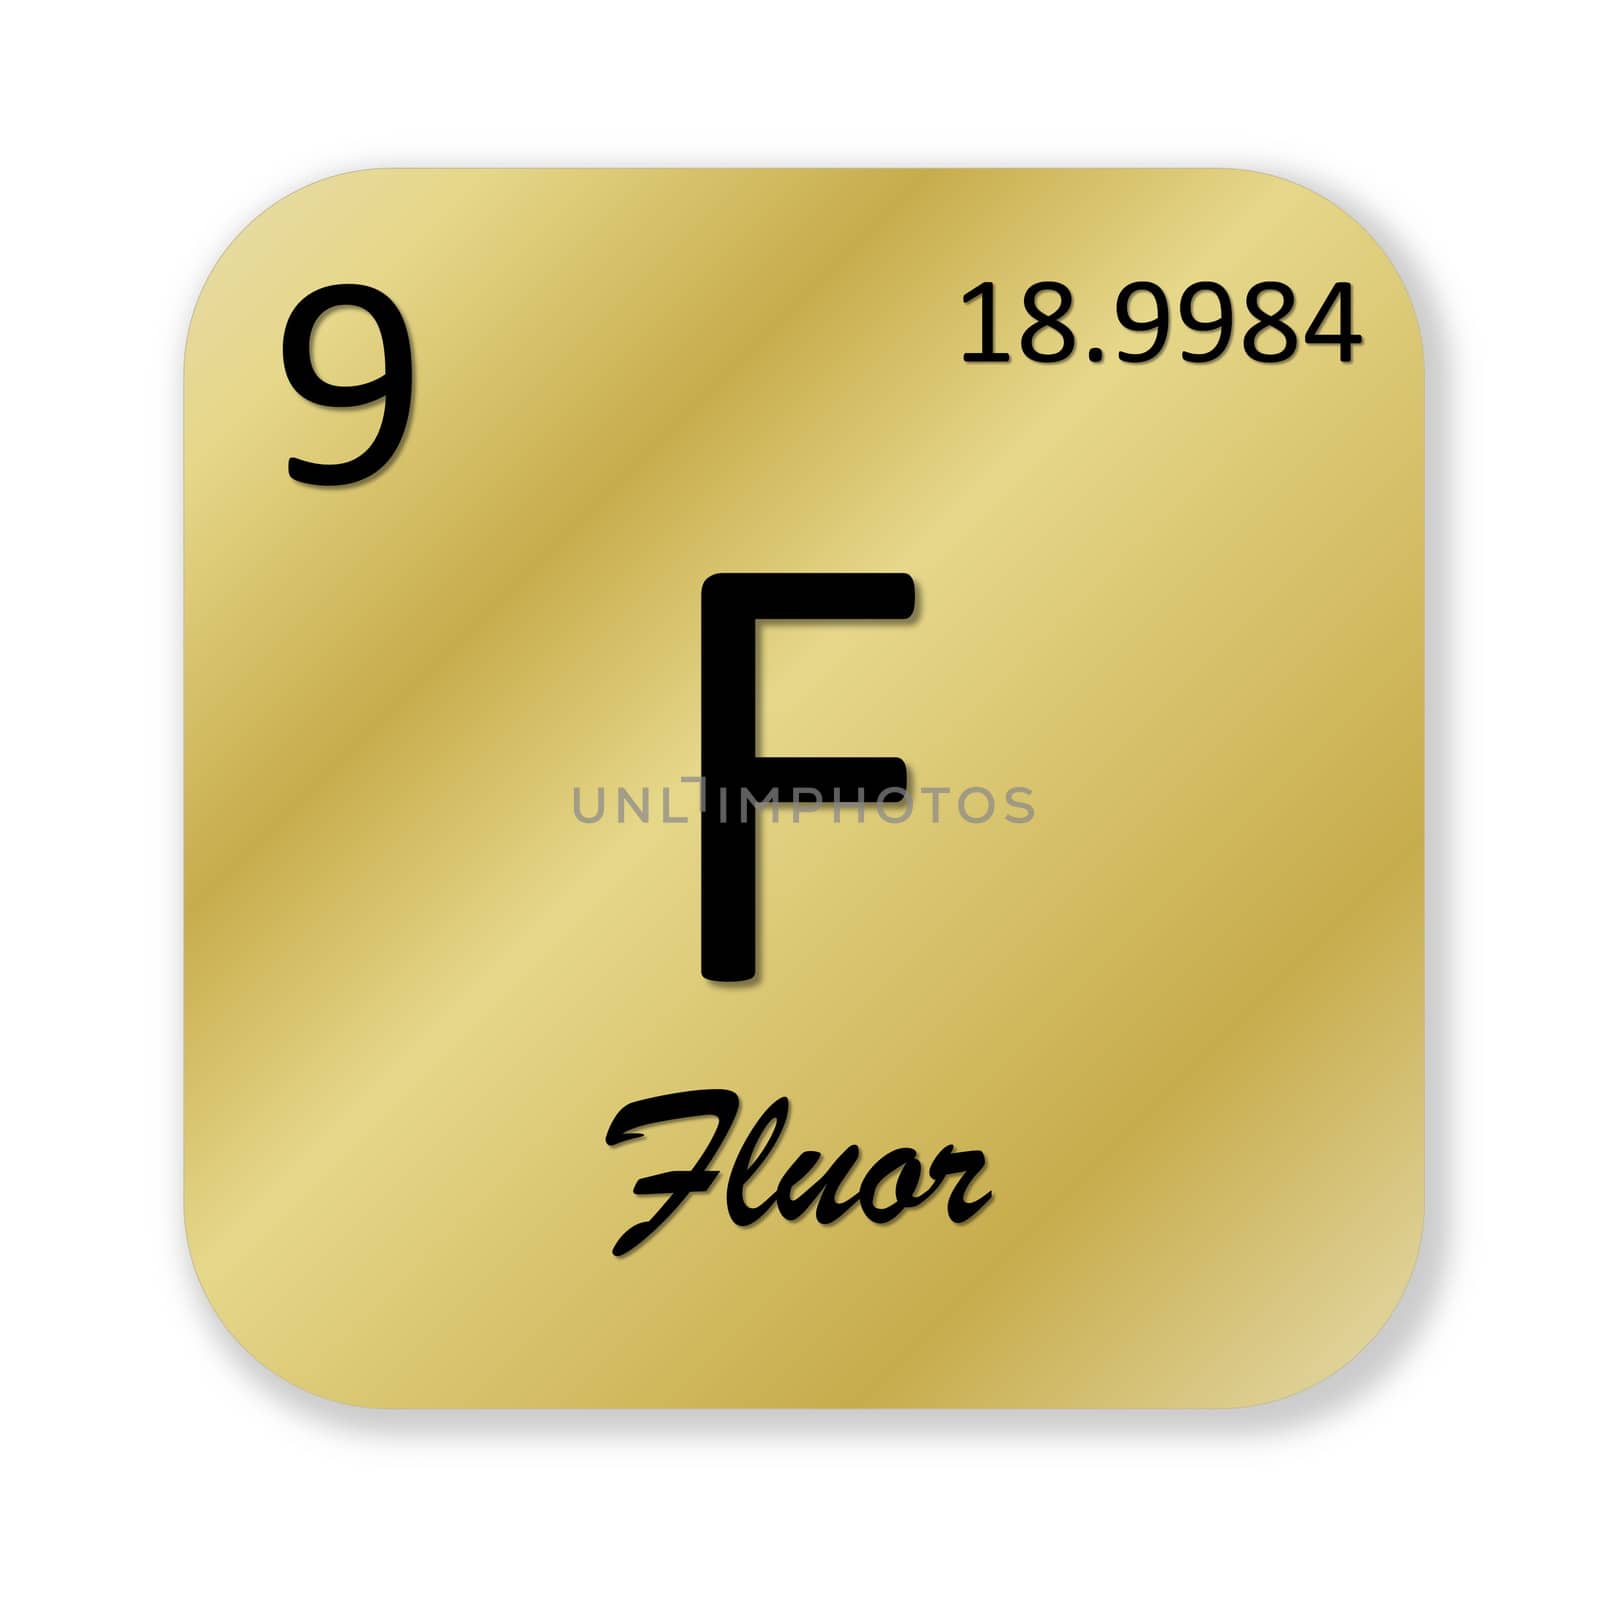 Black fluorine element, french fluor, into golden square shape isolated in white background